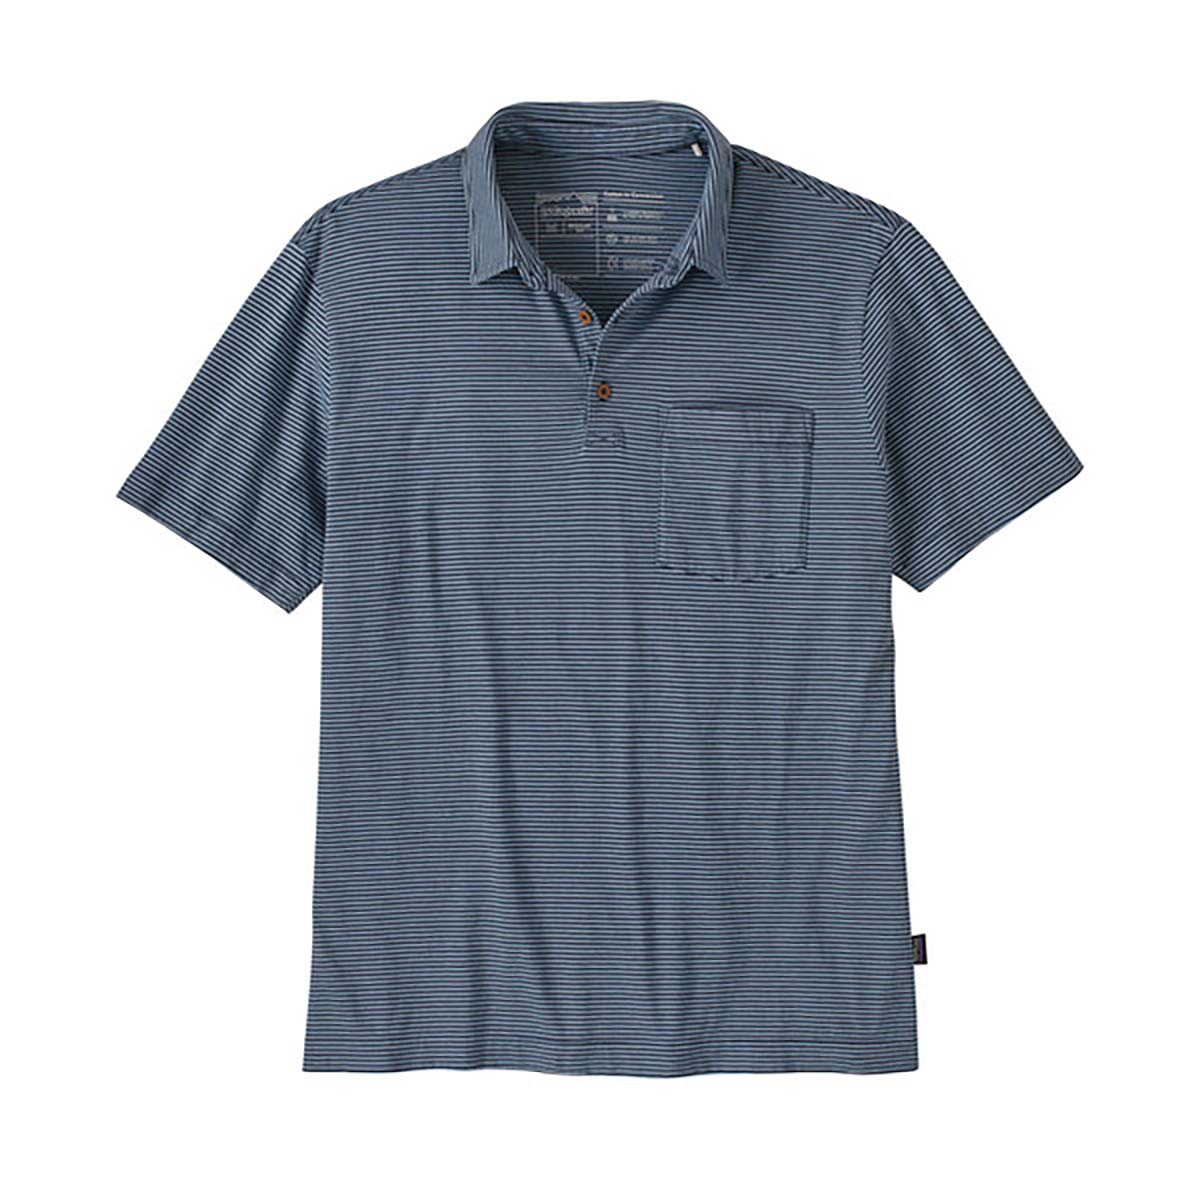 Patagonia Men's Cotton in Conversation Lightweight Polo